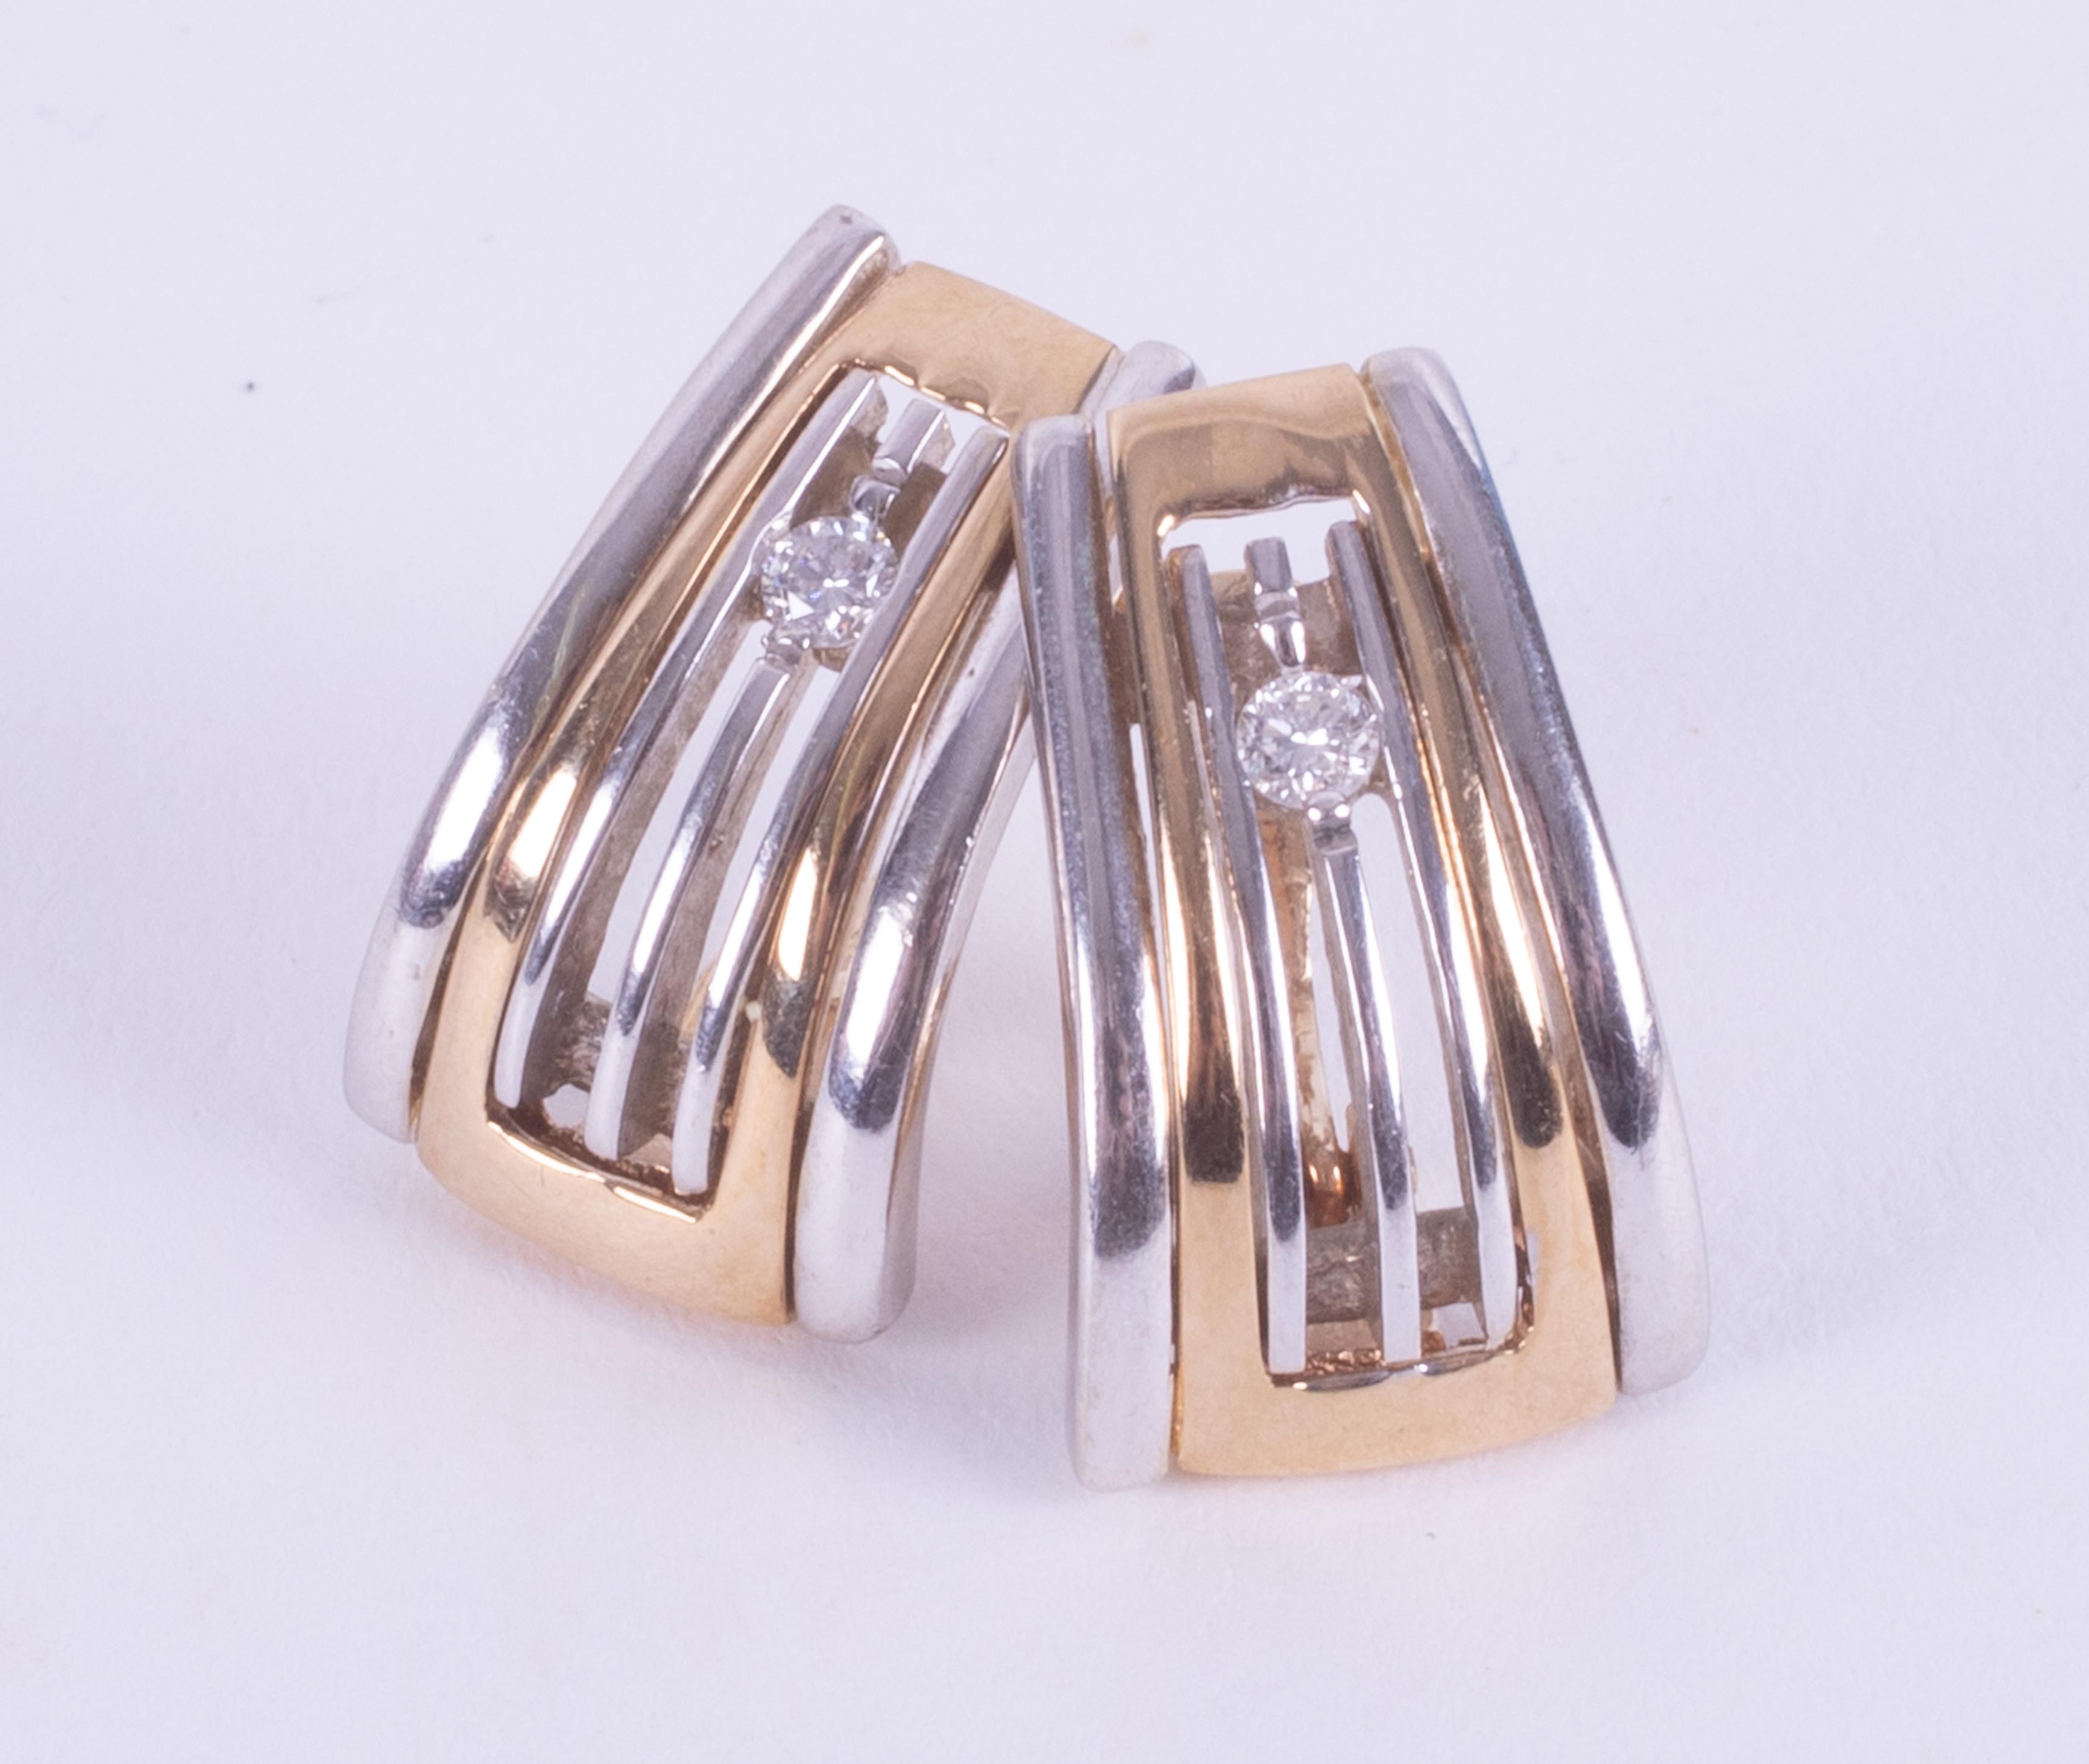 A pair of 9ct yellow & white gold curved design stud earrings set with approx. 0.14 carats total